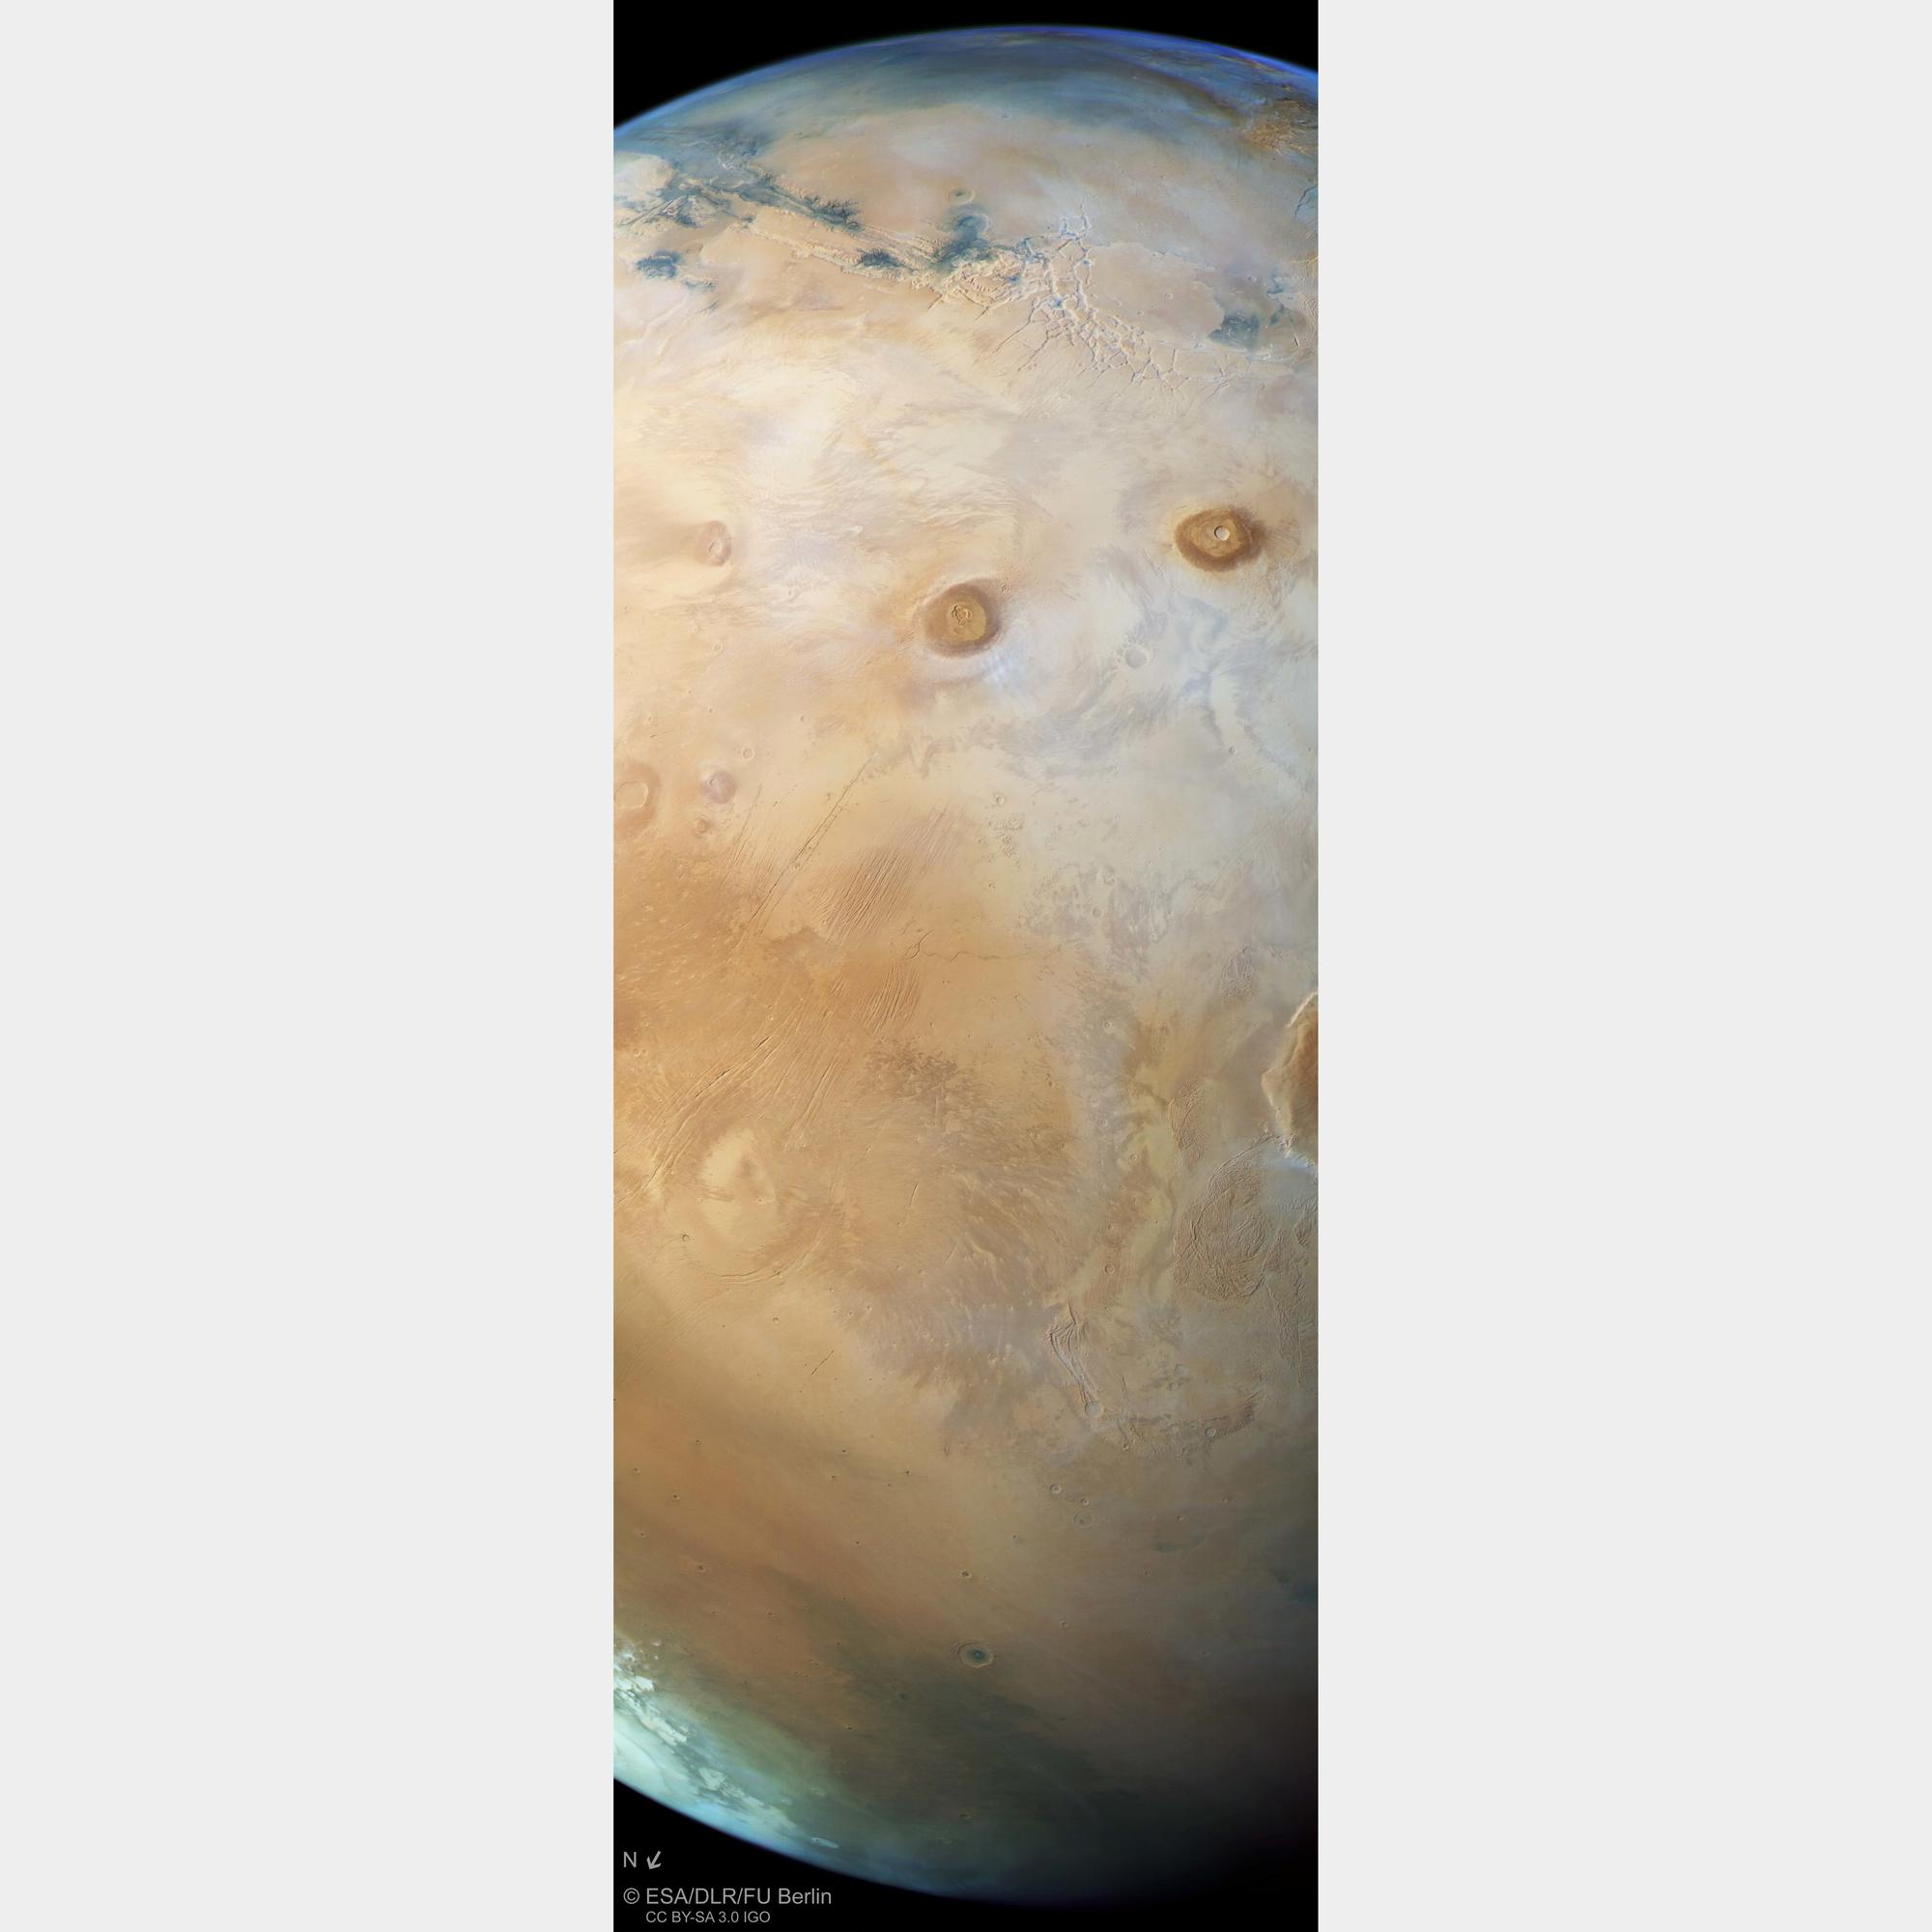 HRSC Color View of Mars